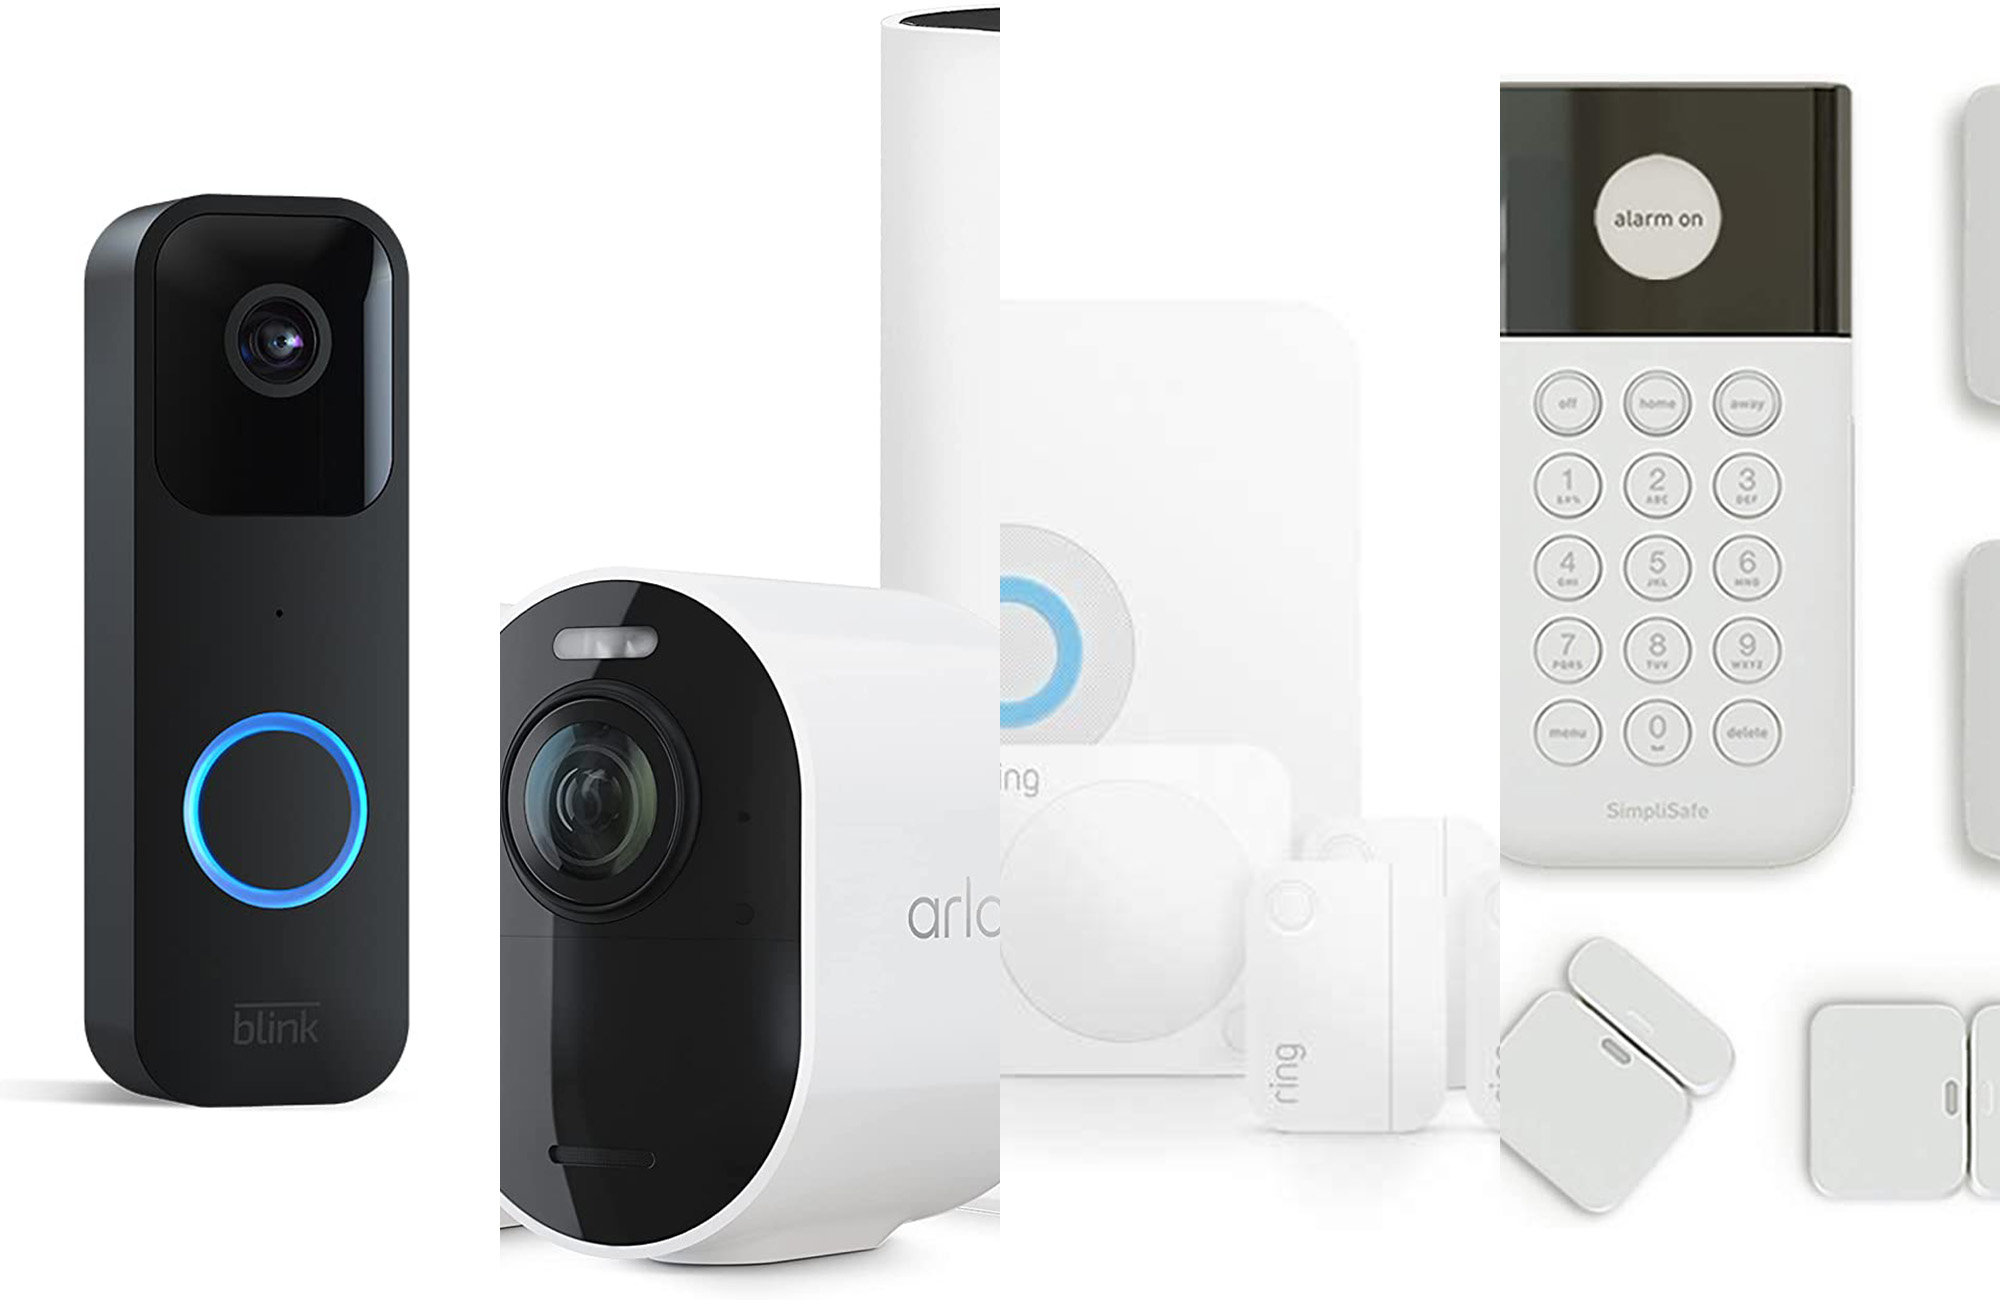 Buy a Ring Alarm Security Kit on Amazon, Get a Free Echo Dot - Voicebot.ai